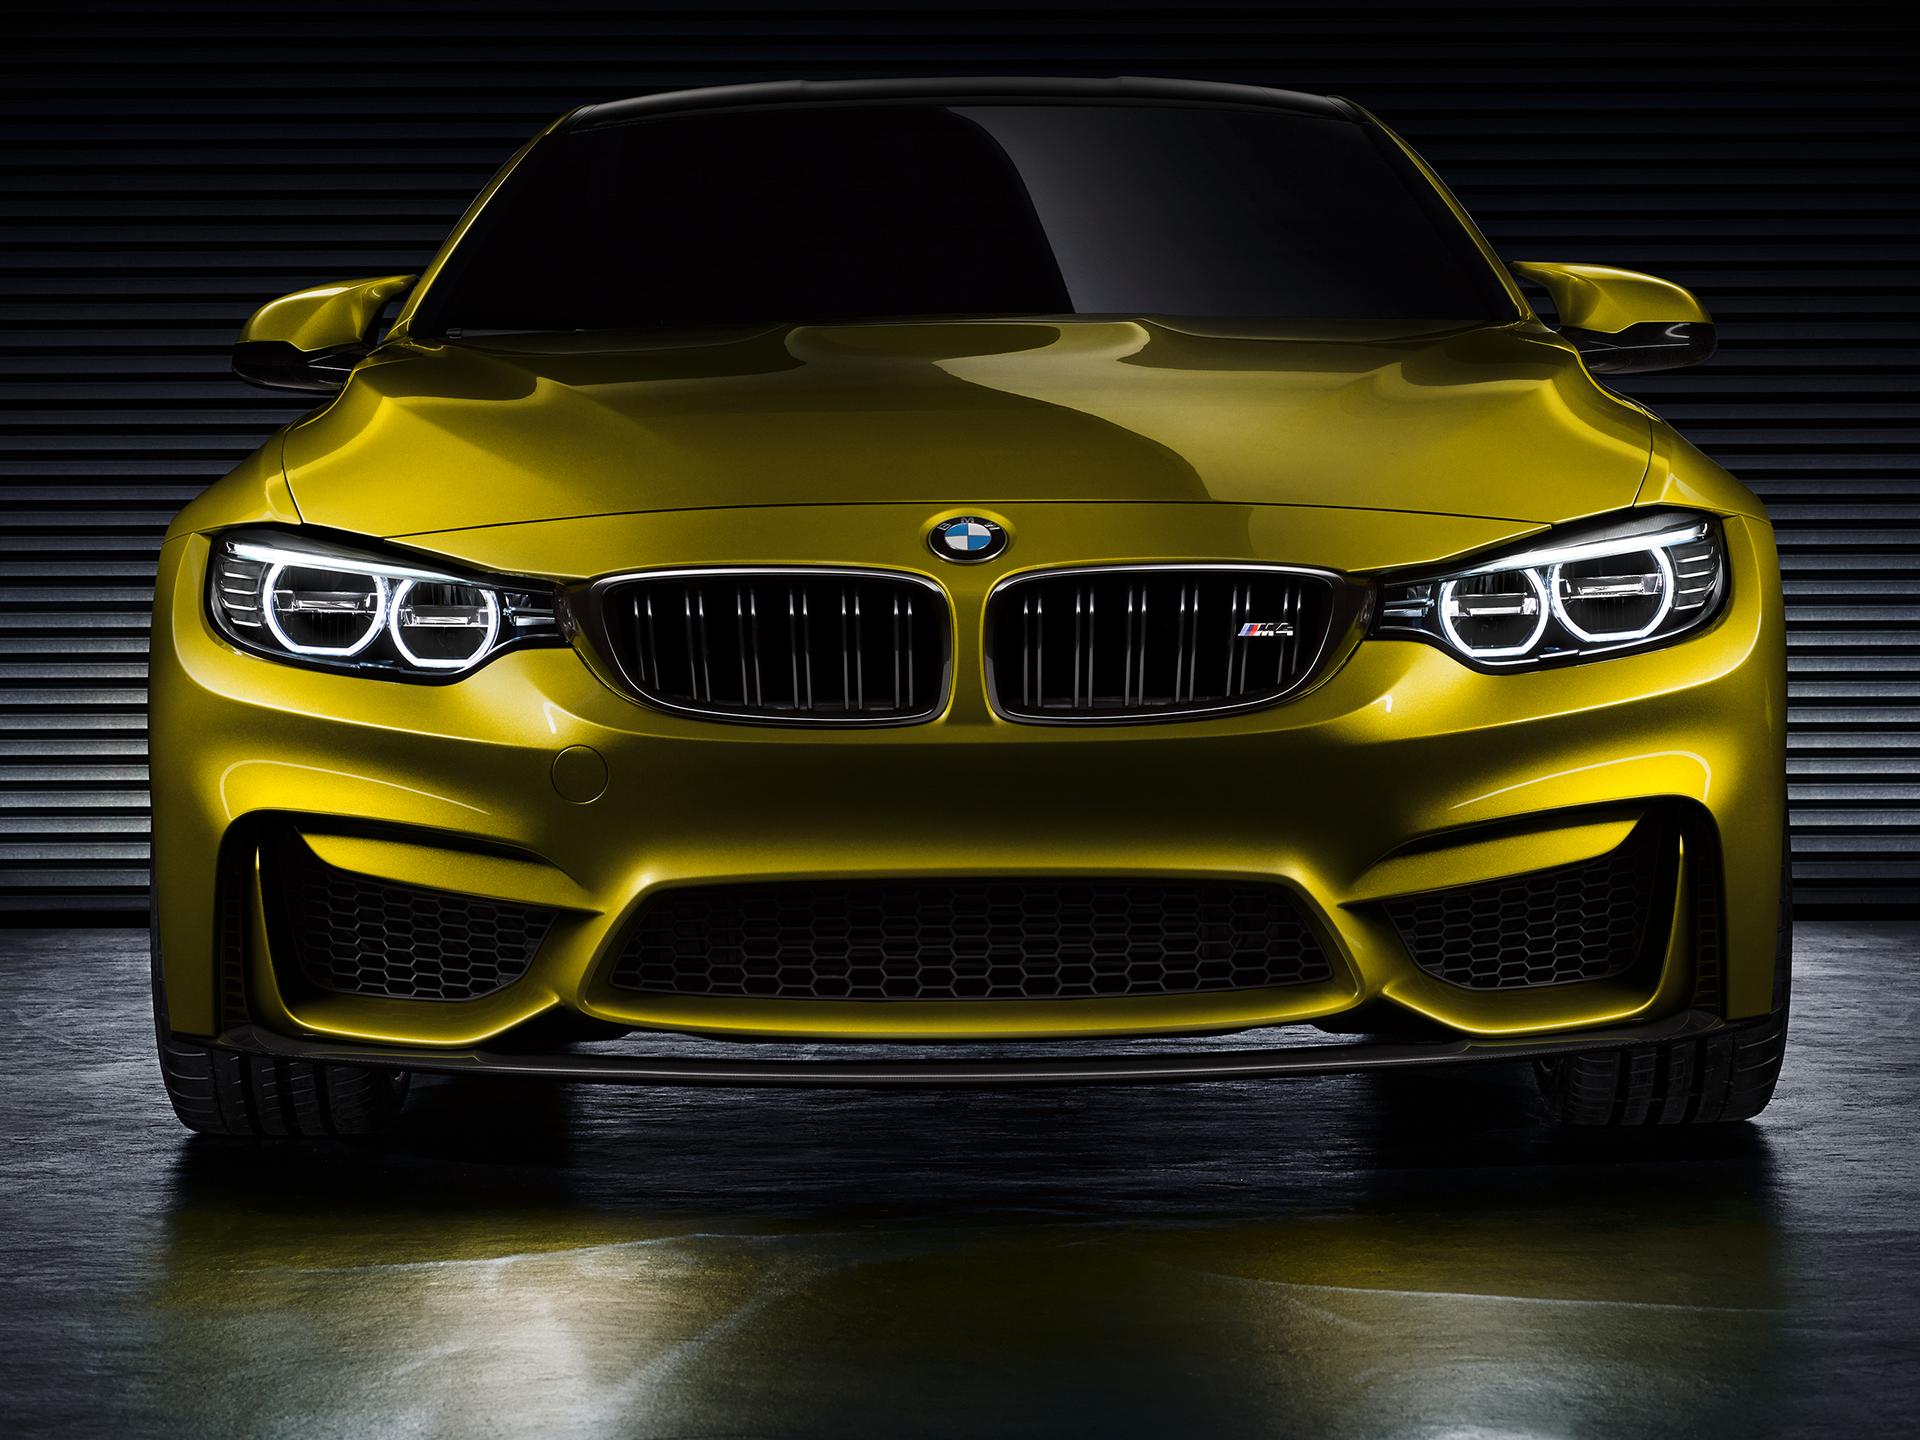 THE FRONT END. Faceted surfaces, precise contours and distinctive visual depth shape the powerfully expressive front end of the BMW Concept M4 Coupe.